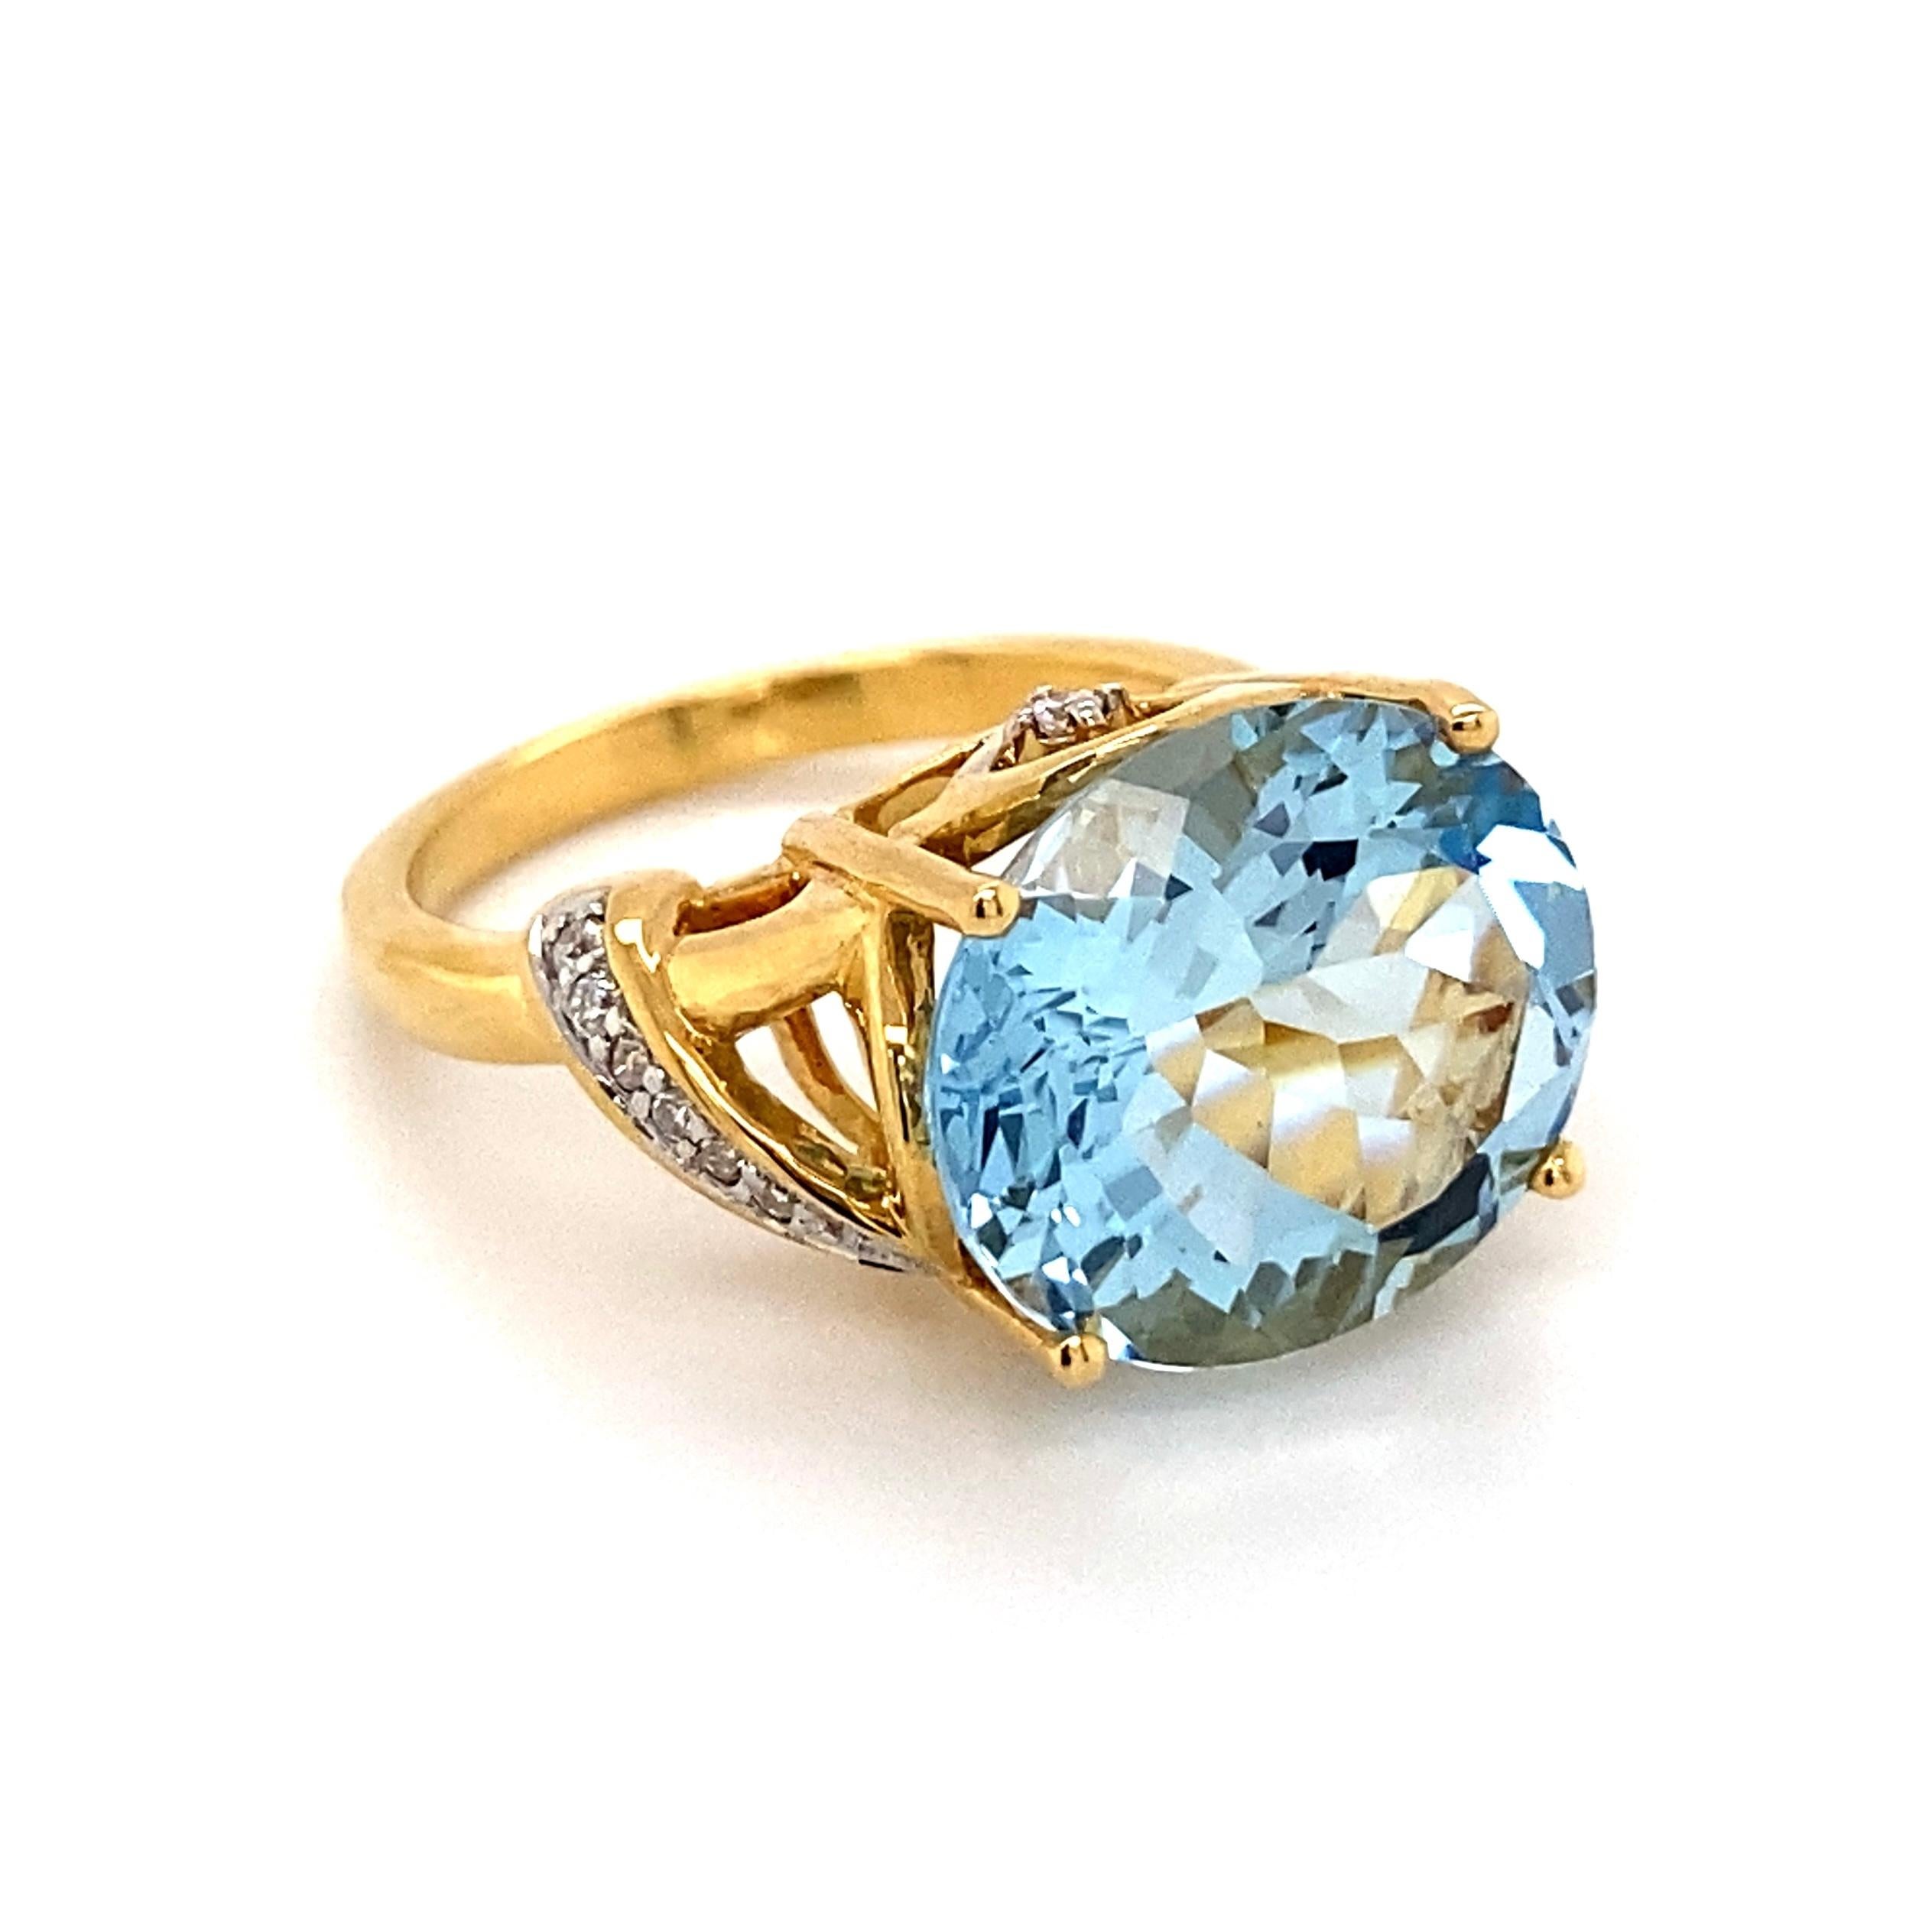 Simply Beautiful! Finely detailed Aquamarine and Diamond Art Deco Revival Cocktail Ring. Centering a Hand set securely nestled 7.61 Carat Oval Aquamarine, surround accented by Round Brilliant-Cut Diamonds, weighing approx. 0.10tcw including sides